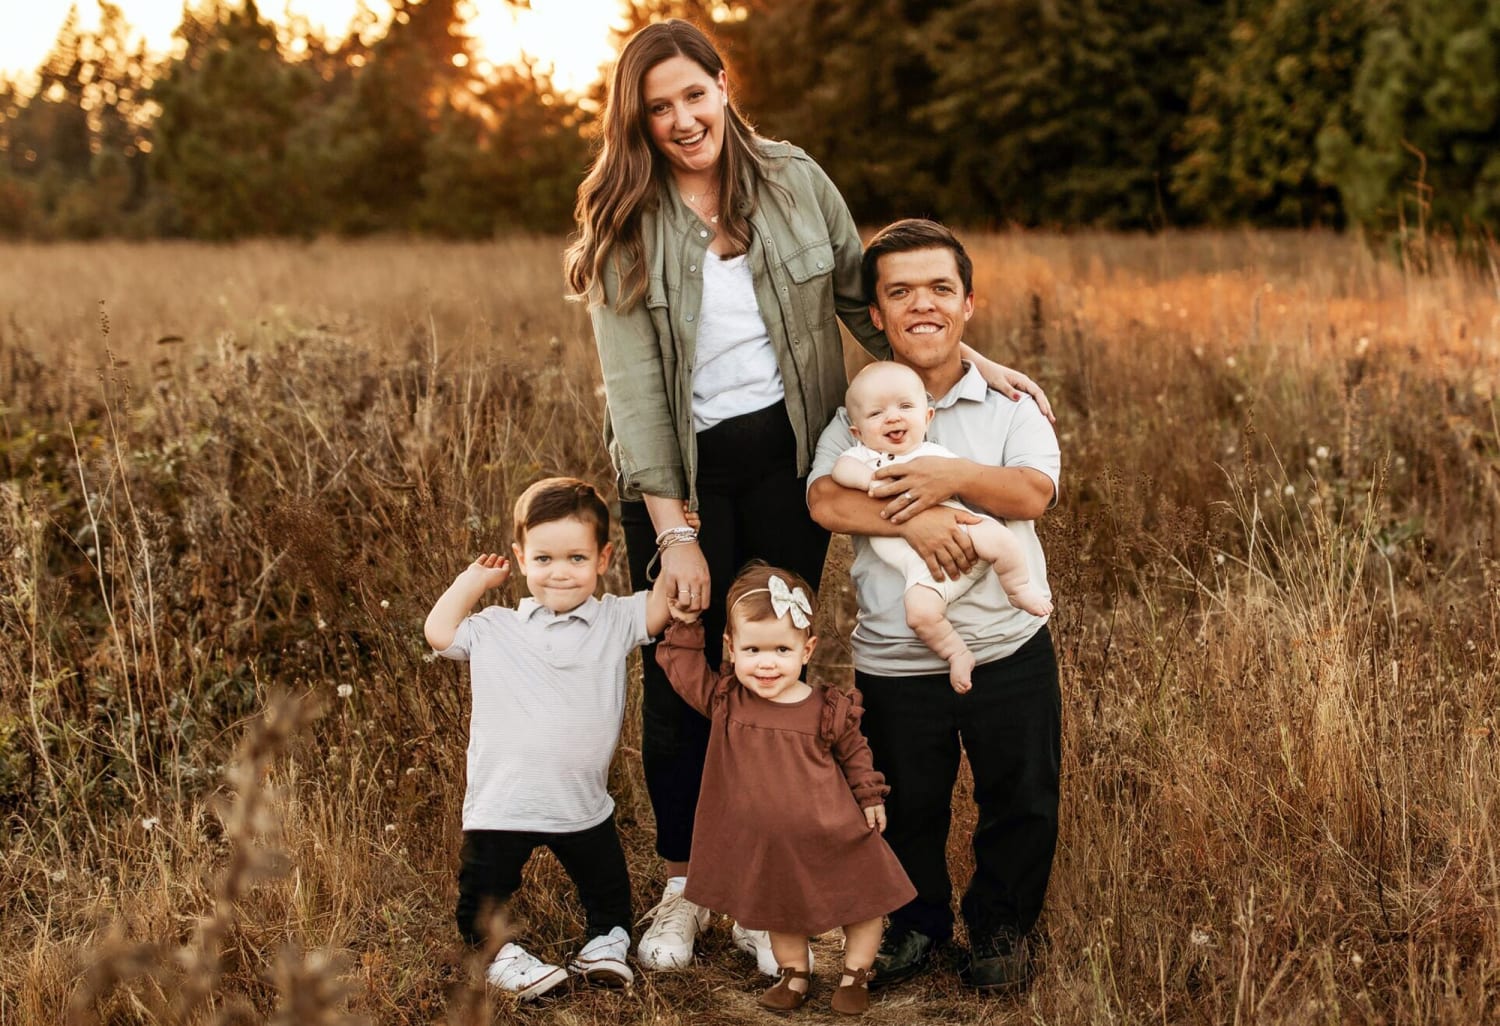 Exclusive: 'Little People, Big World' star Zach Roloff's son asks why he's different from his friends